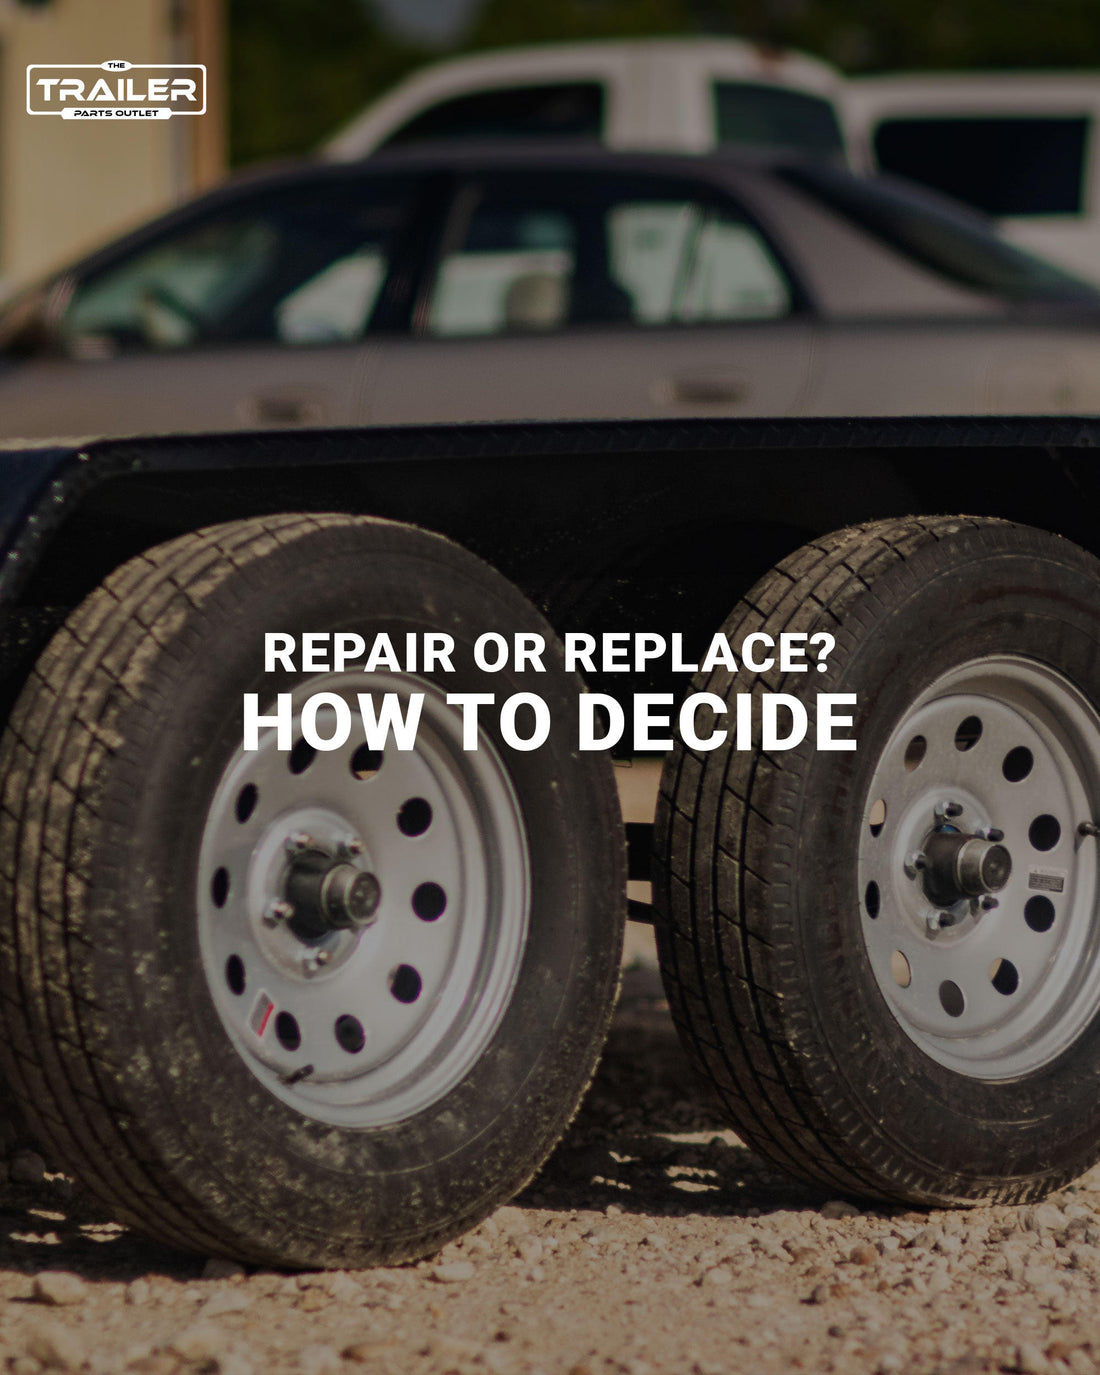 Repair or Replace Your Trailer? Learn How to Decide